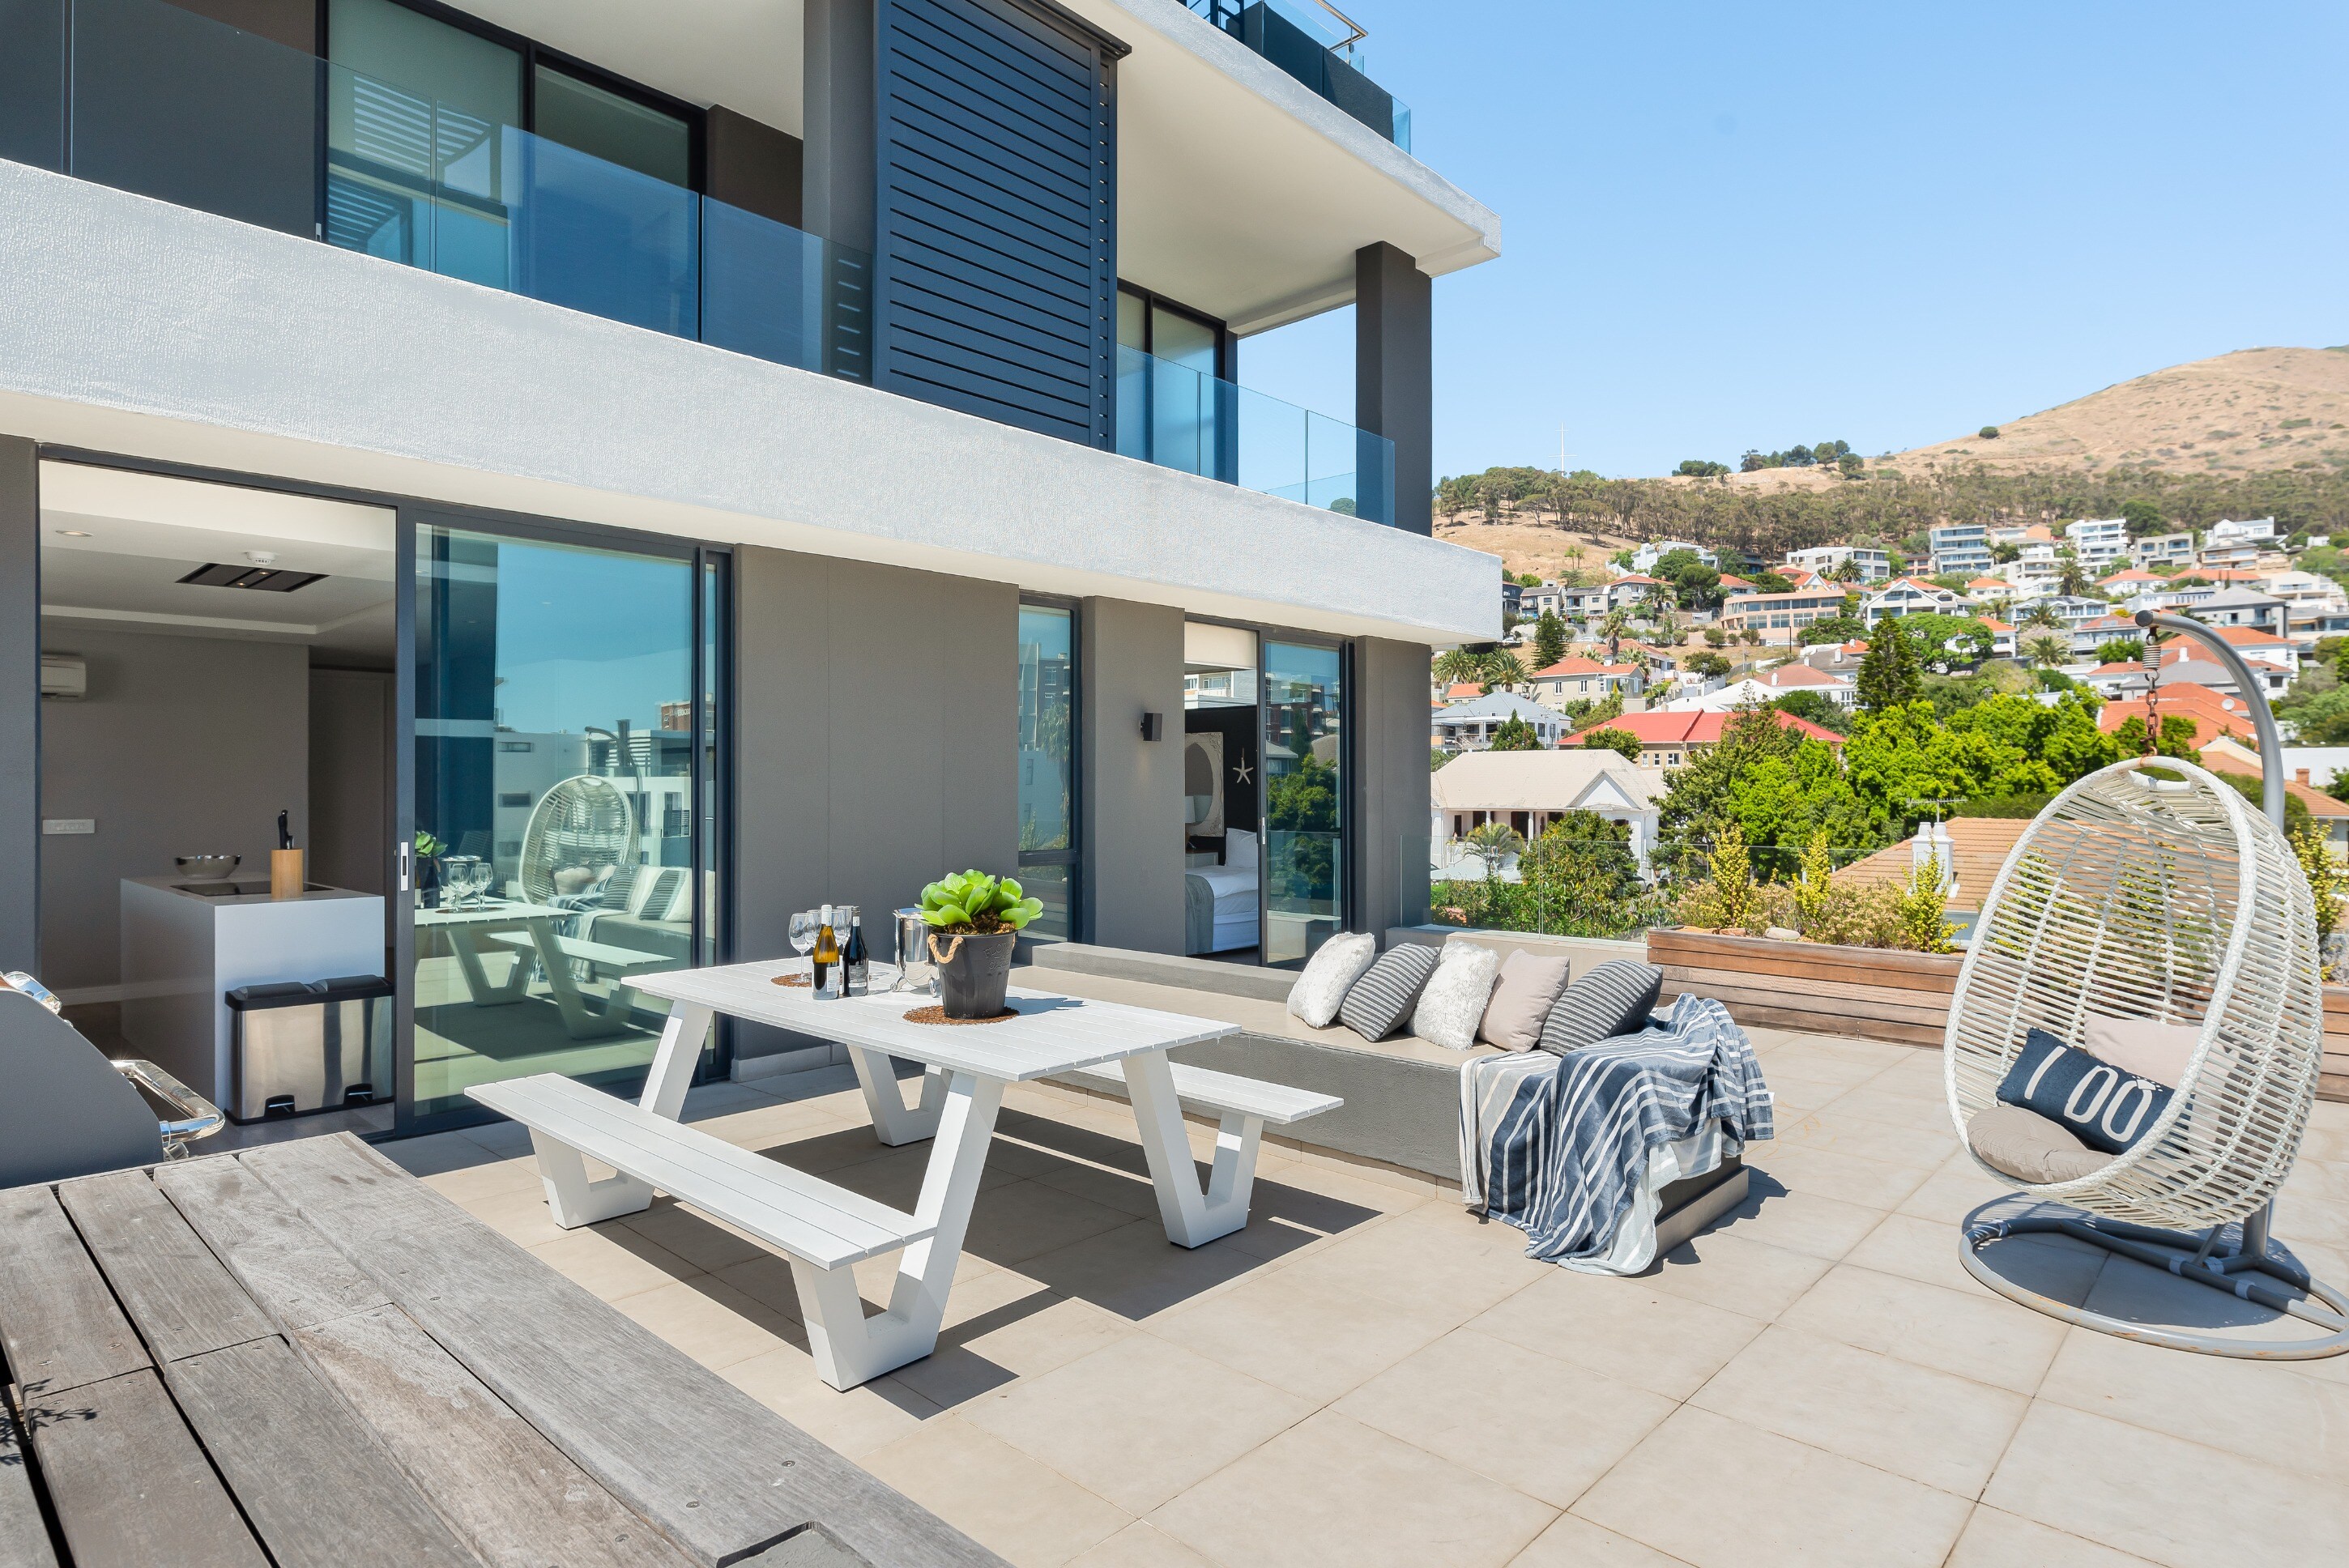 Property Image 2 - Airy Penthouse with Spacious Deck for Al Fresco Dining